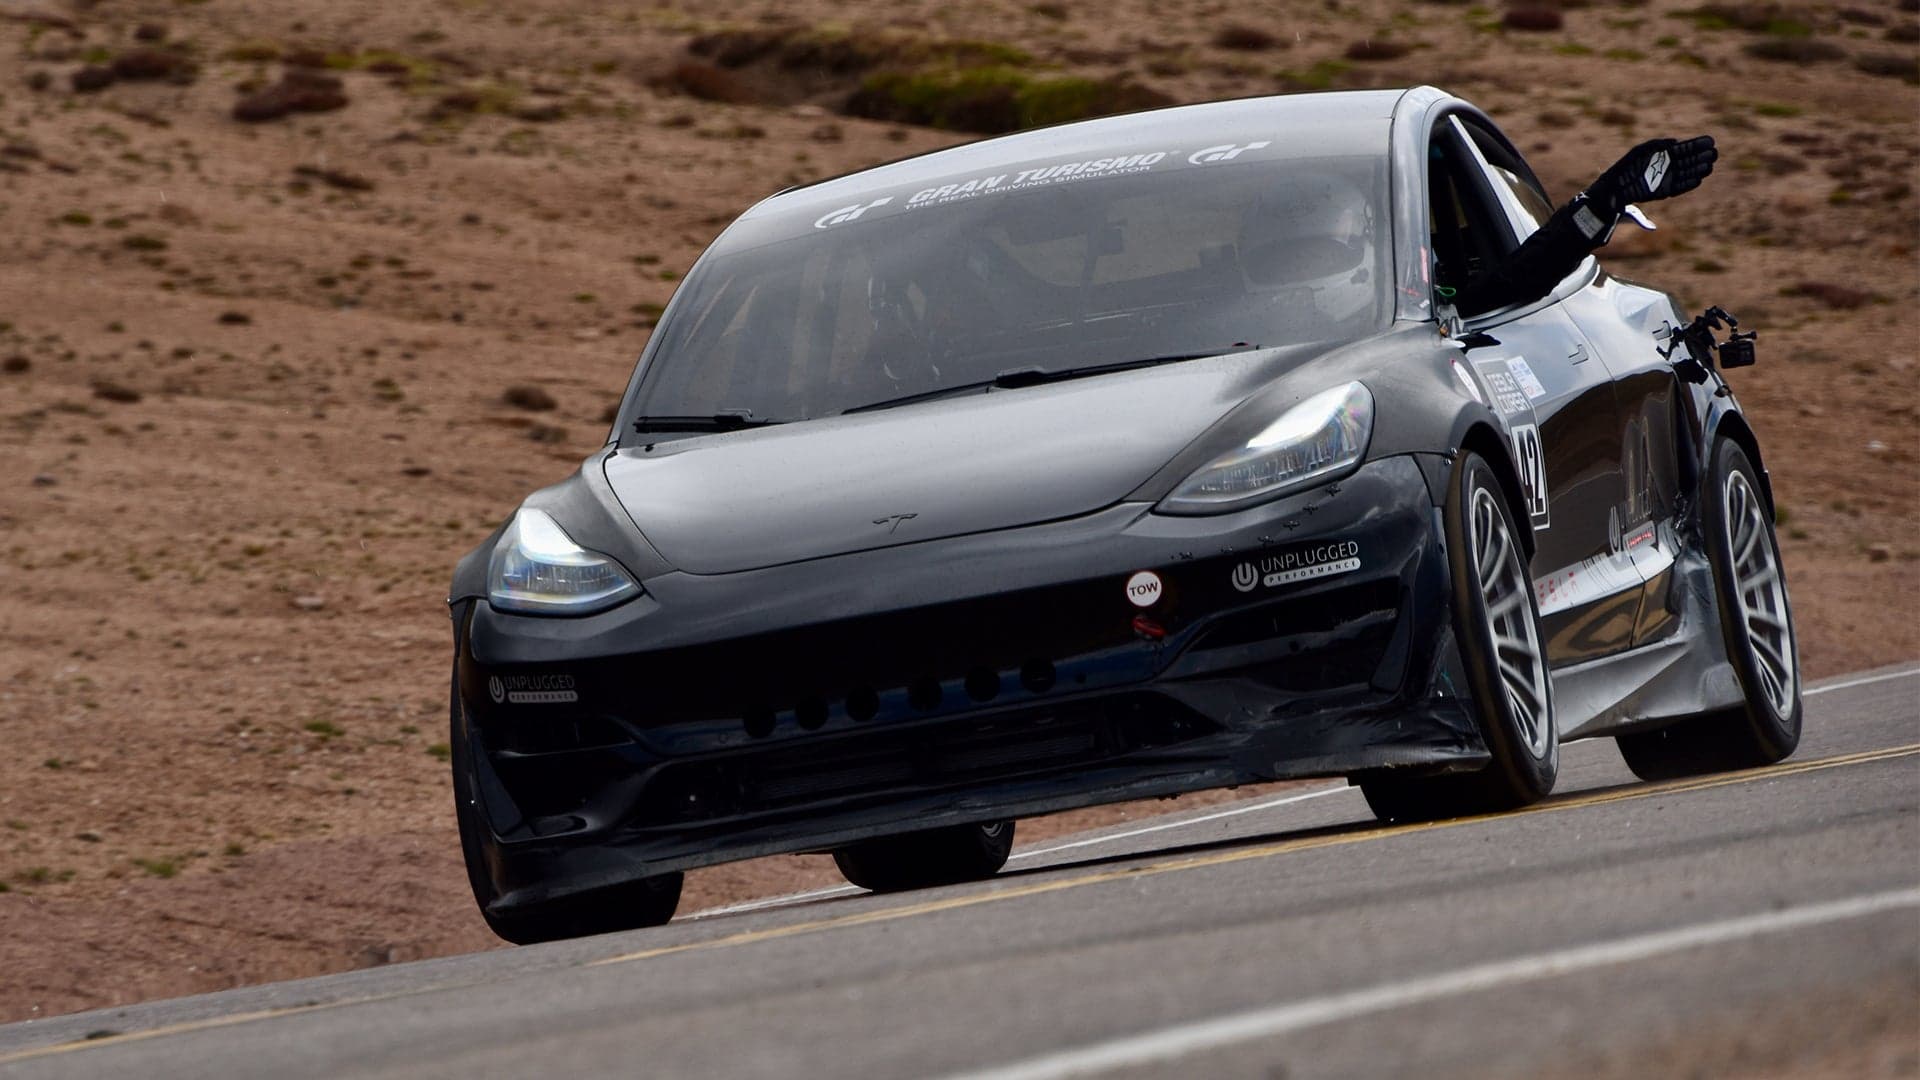 Tesla Model 3 Crashed on Friday, Rebuilt on Saturday, Driven to Second in Pikes Peak on Sunday